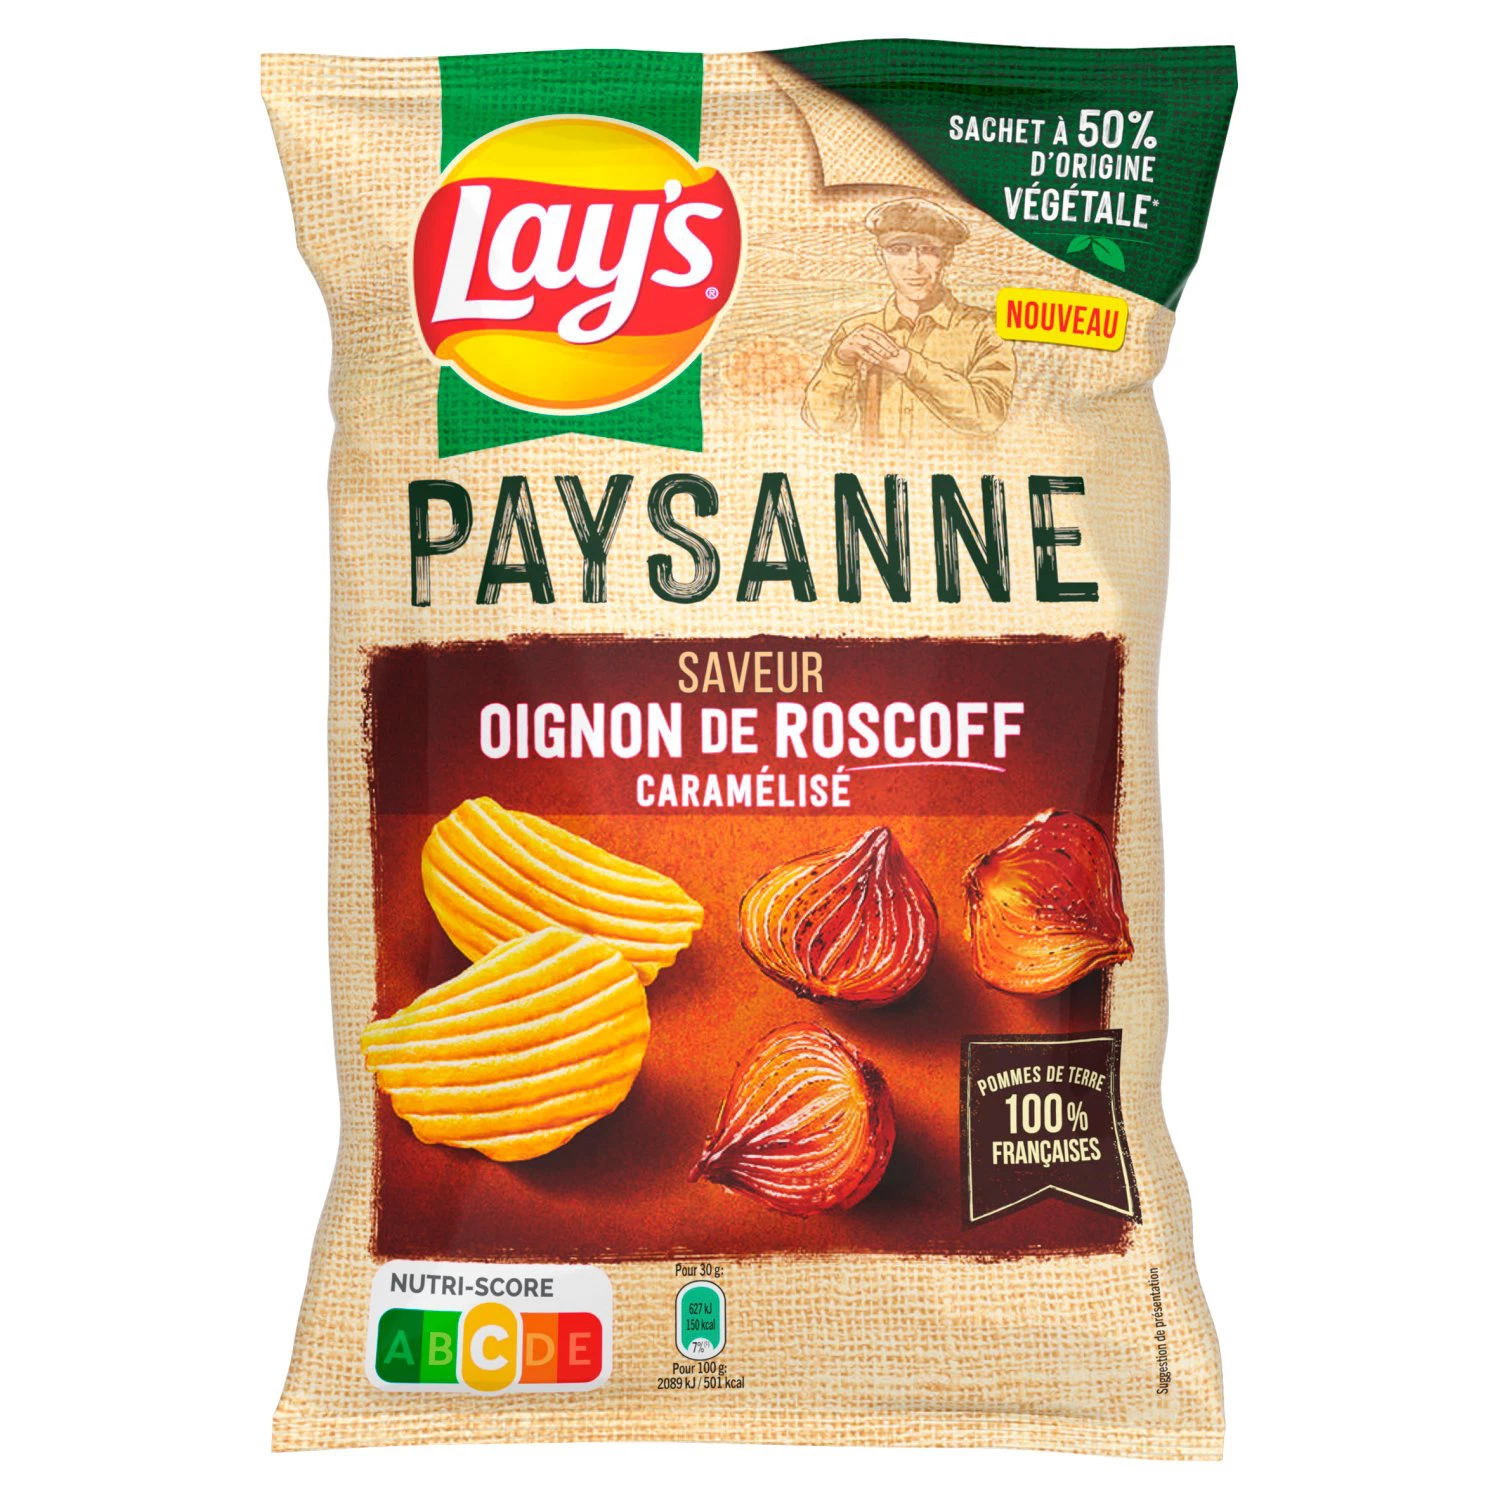 Chips Peasant Recipe Caramelized Roscoff Onion Flavor, 120g - LAY'S